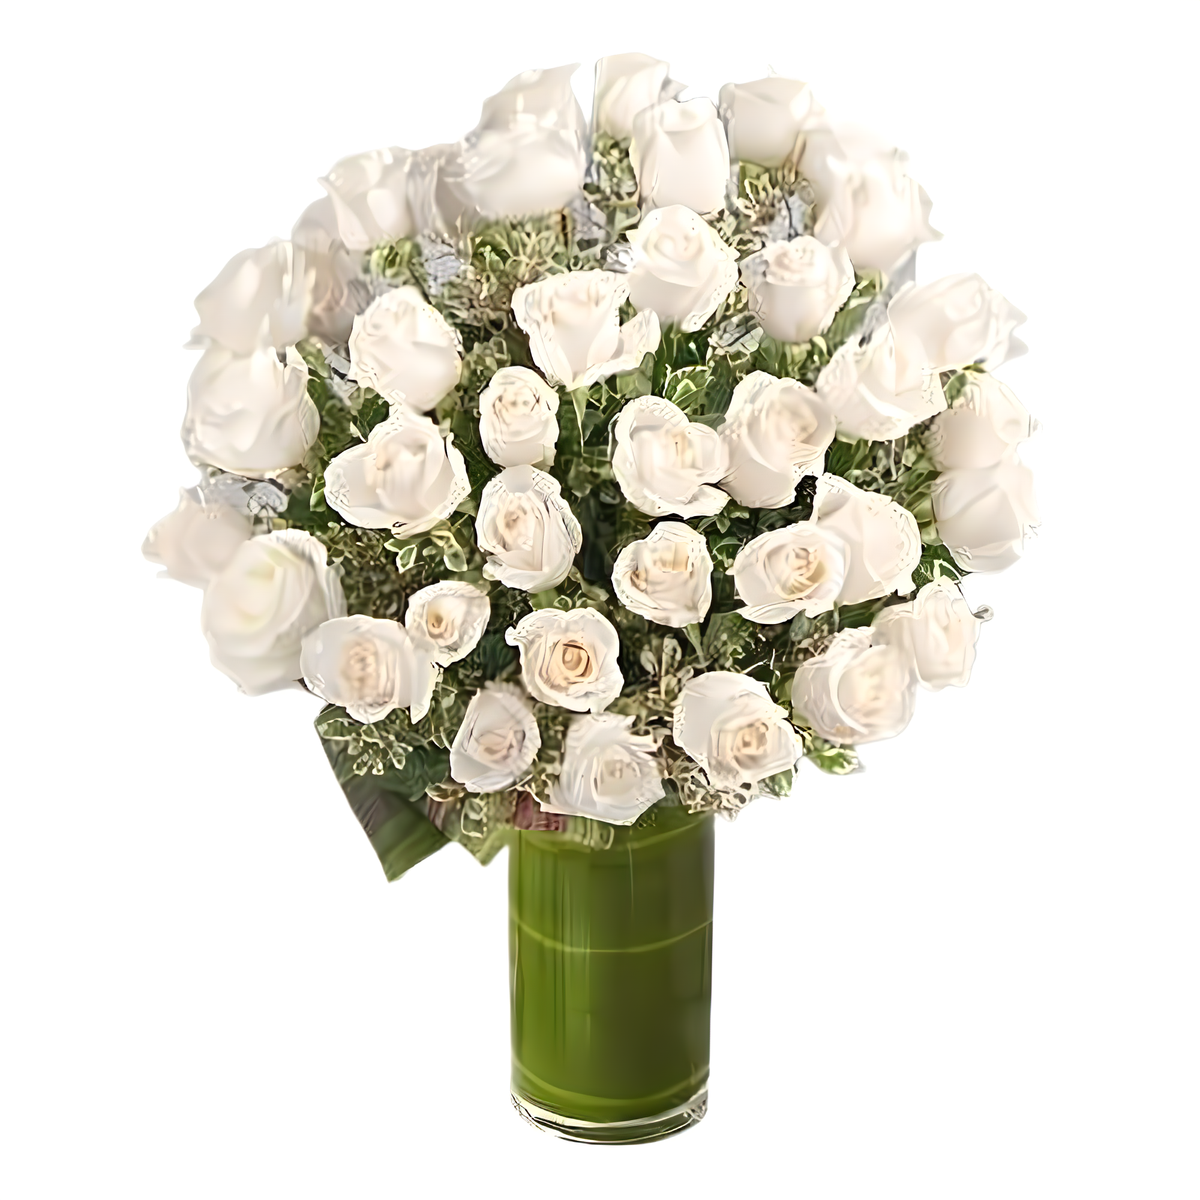 Manhattan Flower Delivery - Luxury Rose Bouquet - 48 Premium White Long-Stem Roses - Products &gt; Luxury Collection